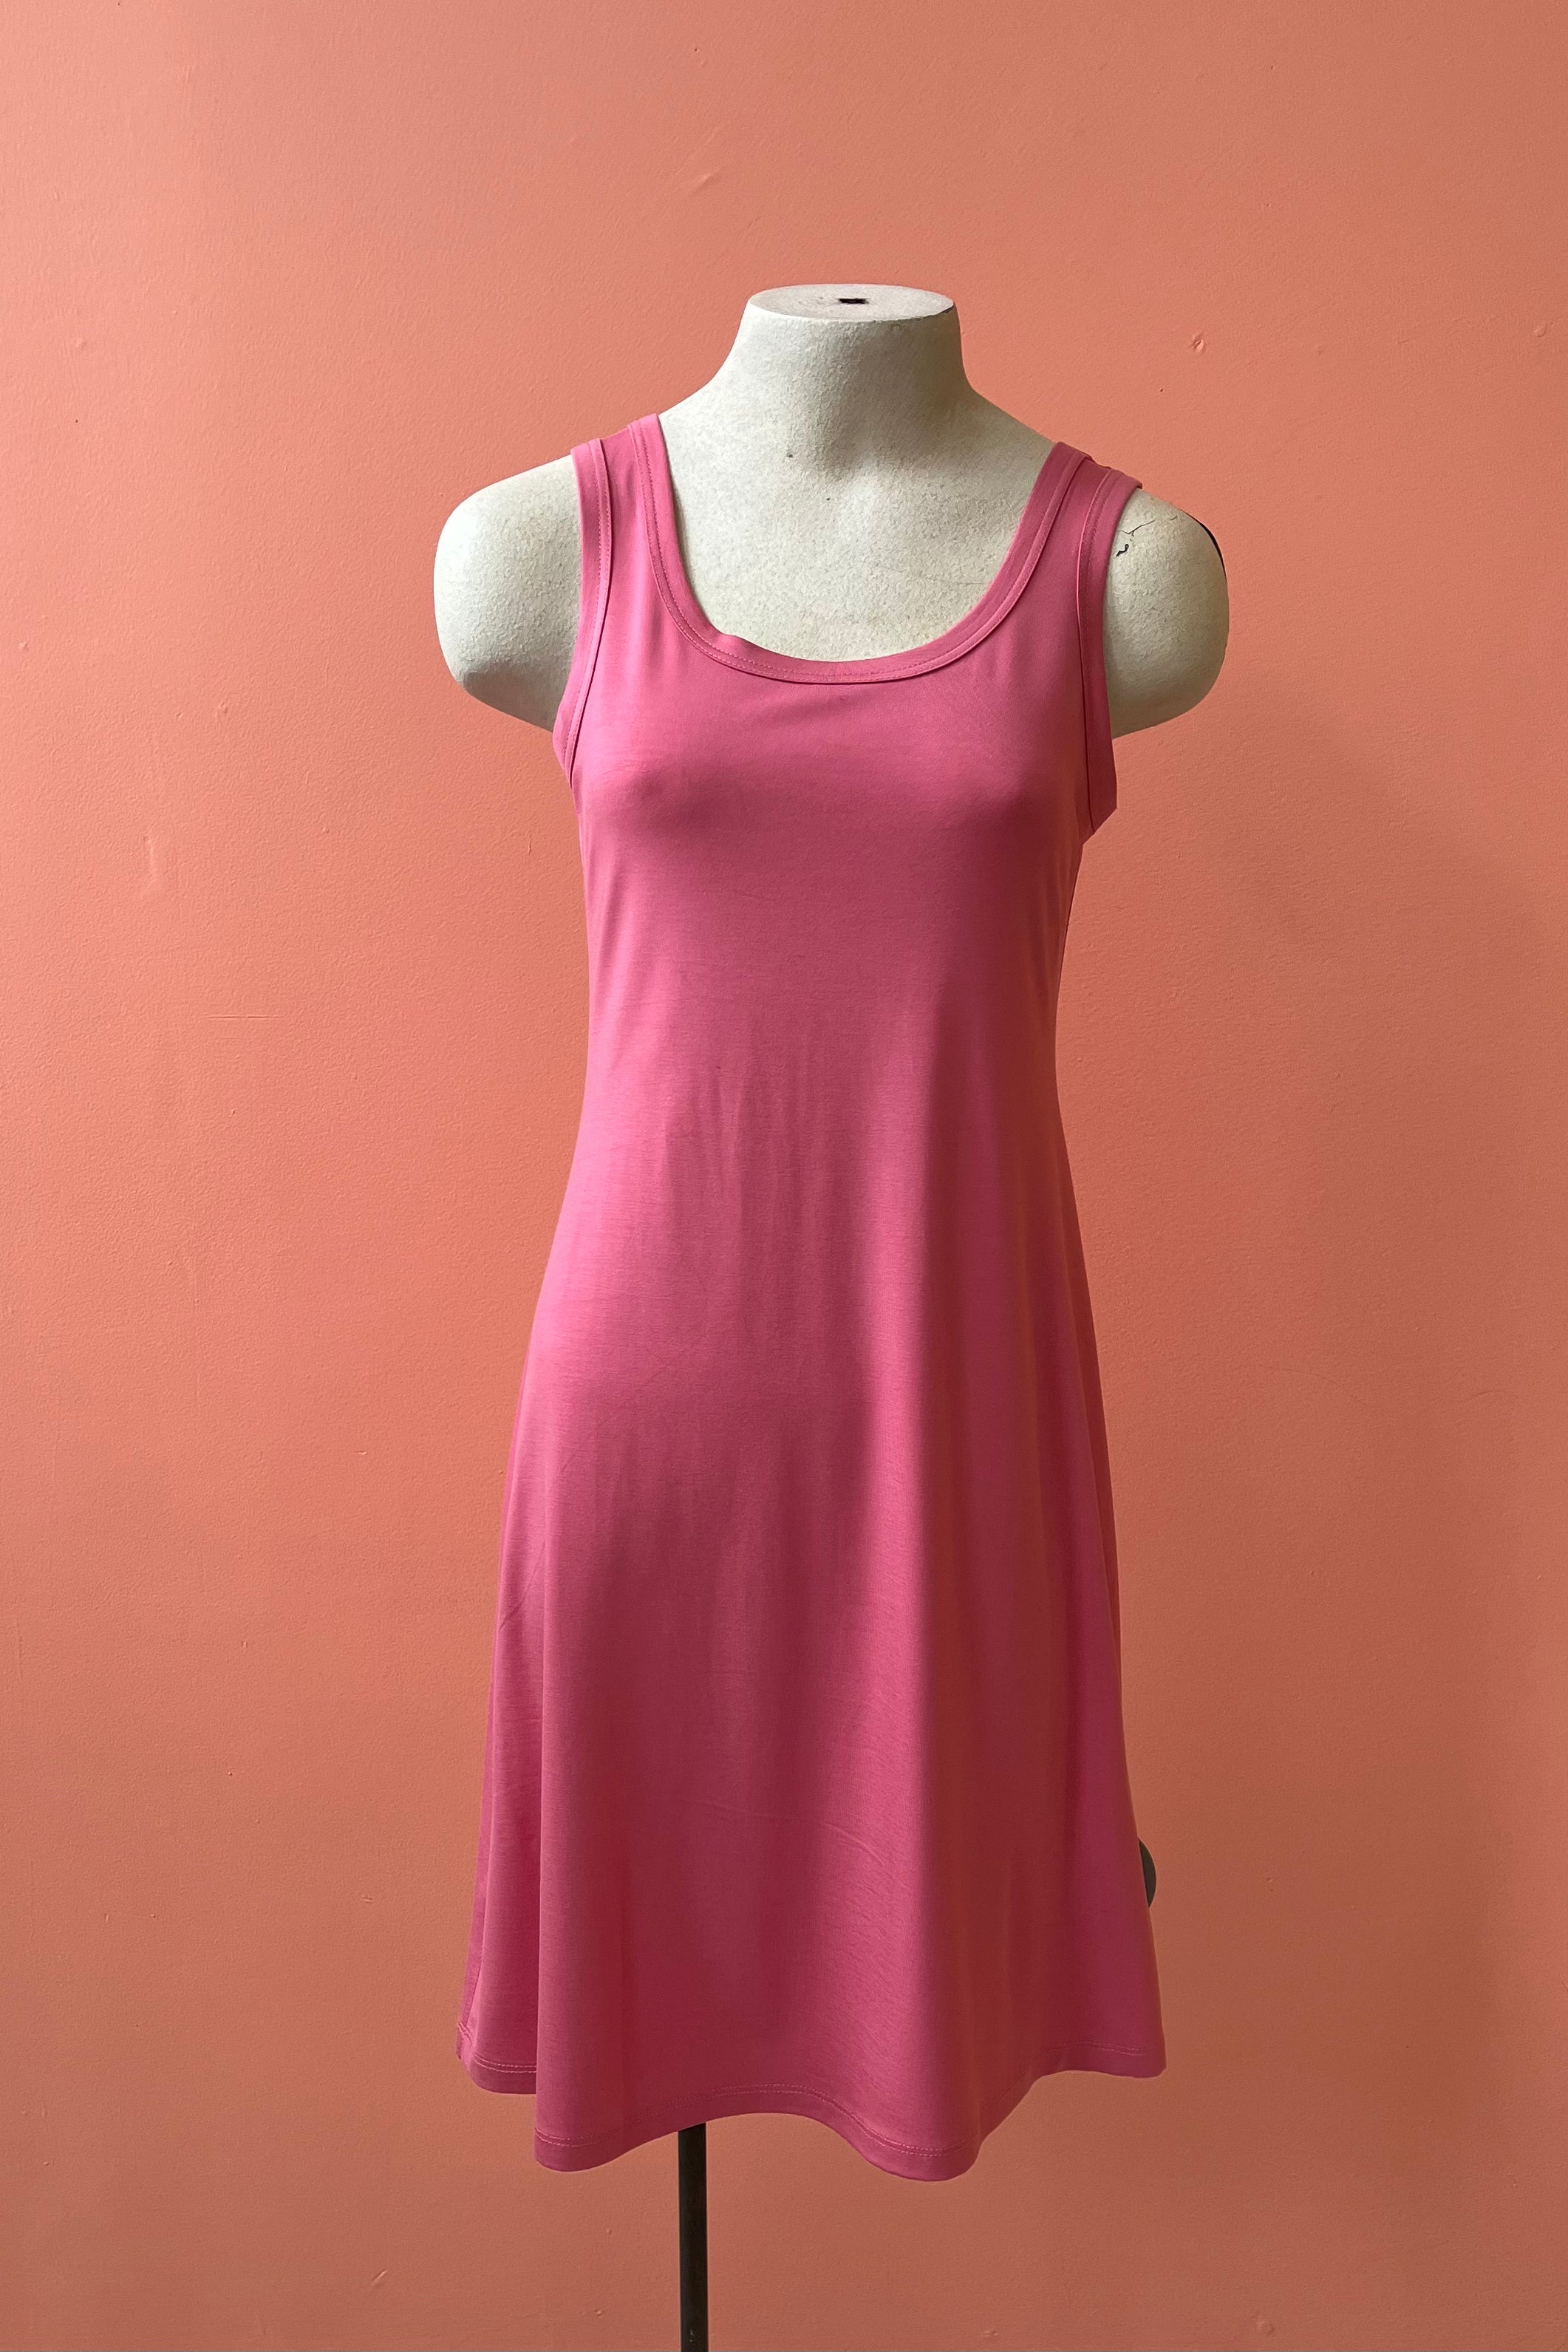 B-Dress by Yul Voy, Coral, tank dress, wide straps, scoop neck front and back, A-line shape, above the knee, sizes XS to XXL, made in Montreal